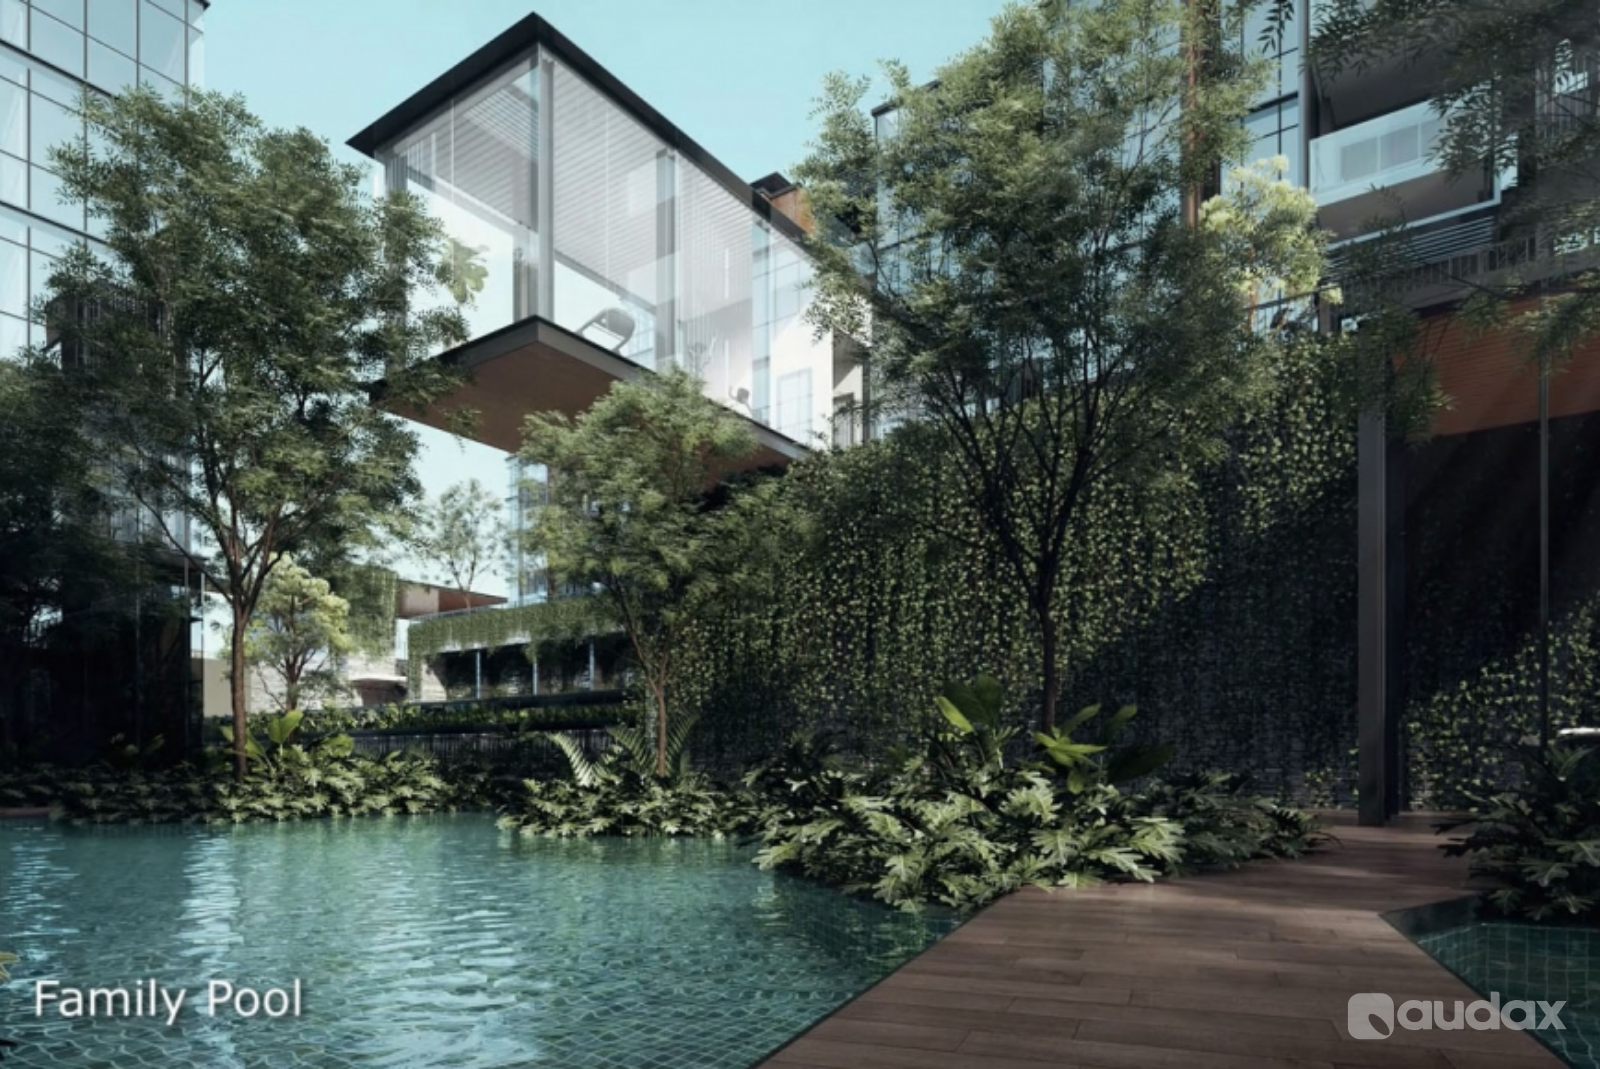 3D Rendering Real Estate Perspective By Audax 